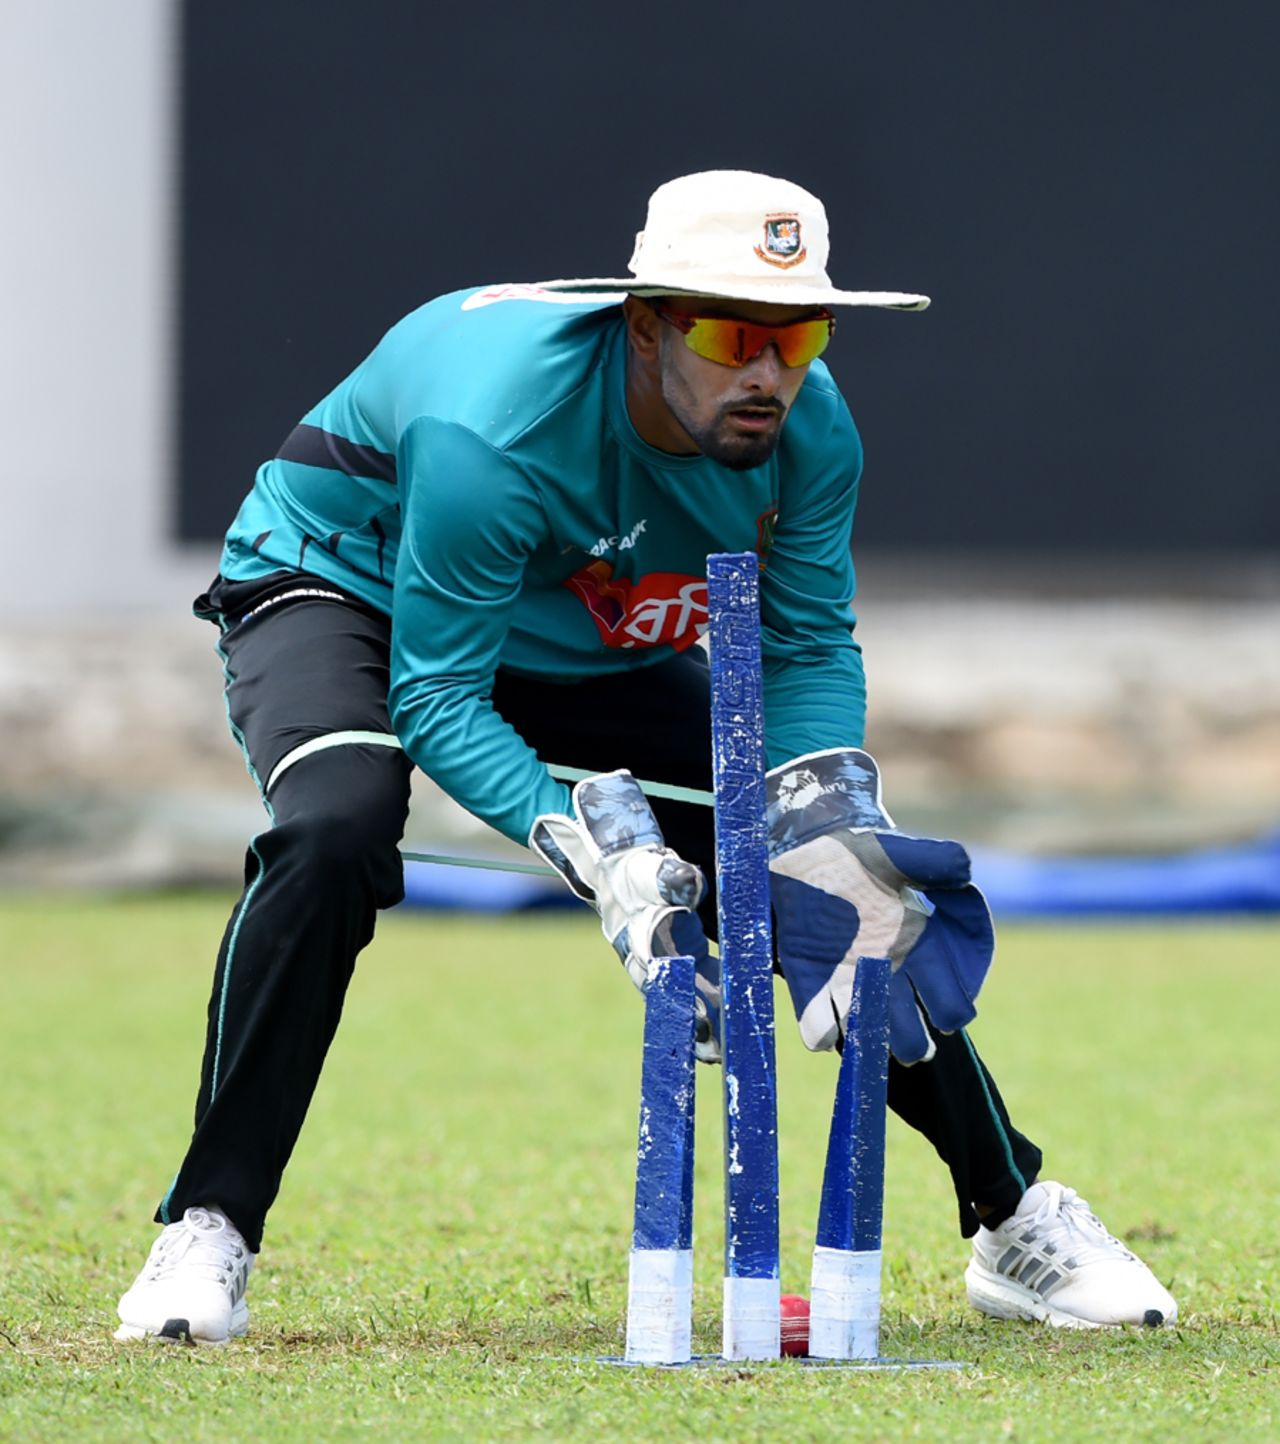 Liton Das hones his glovework during training, Colombo, March 13, 2017